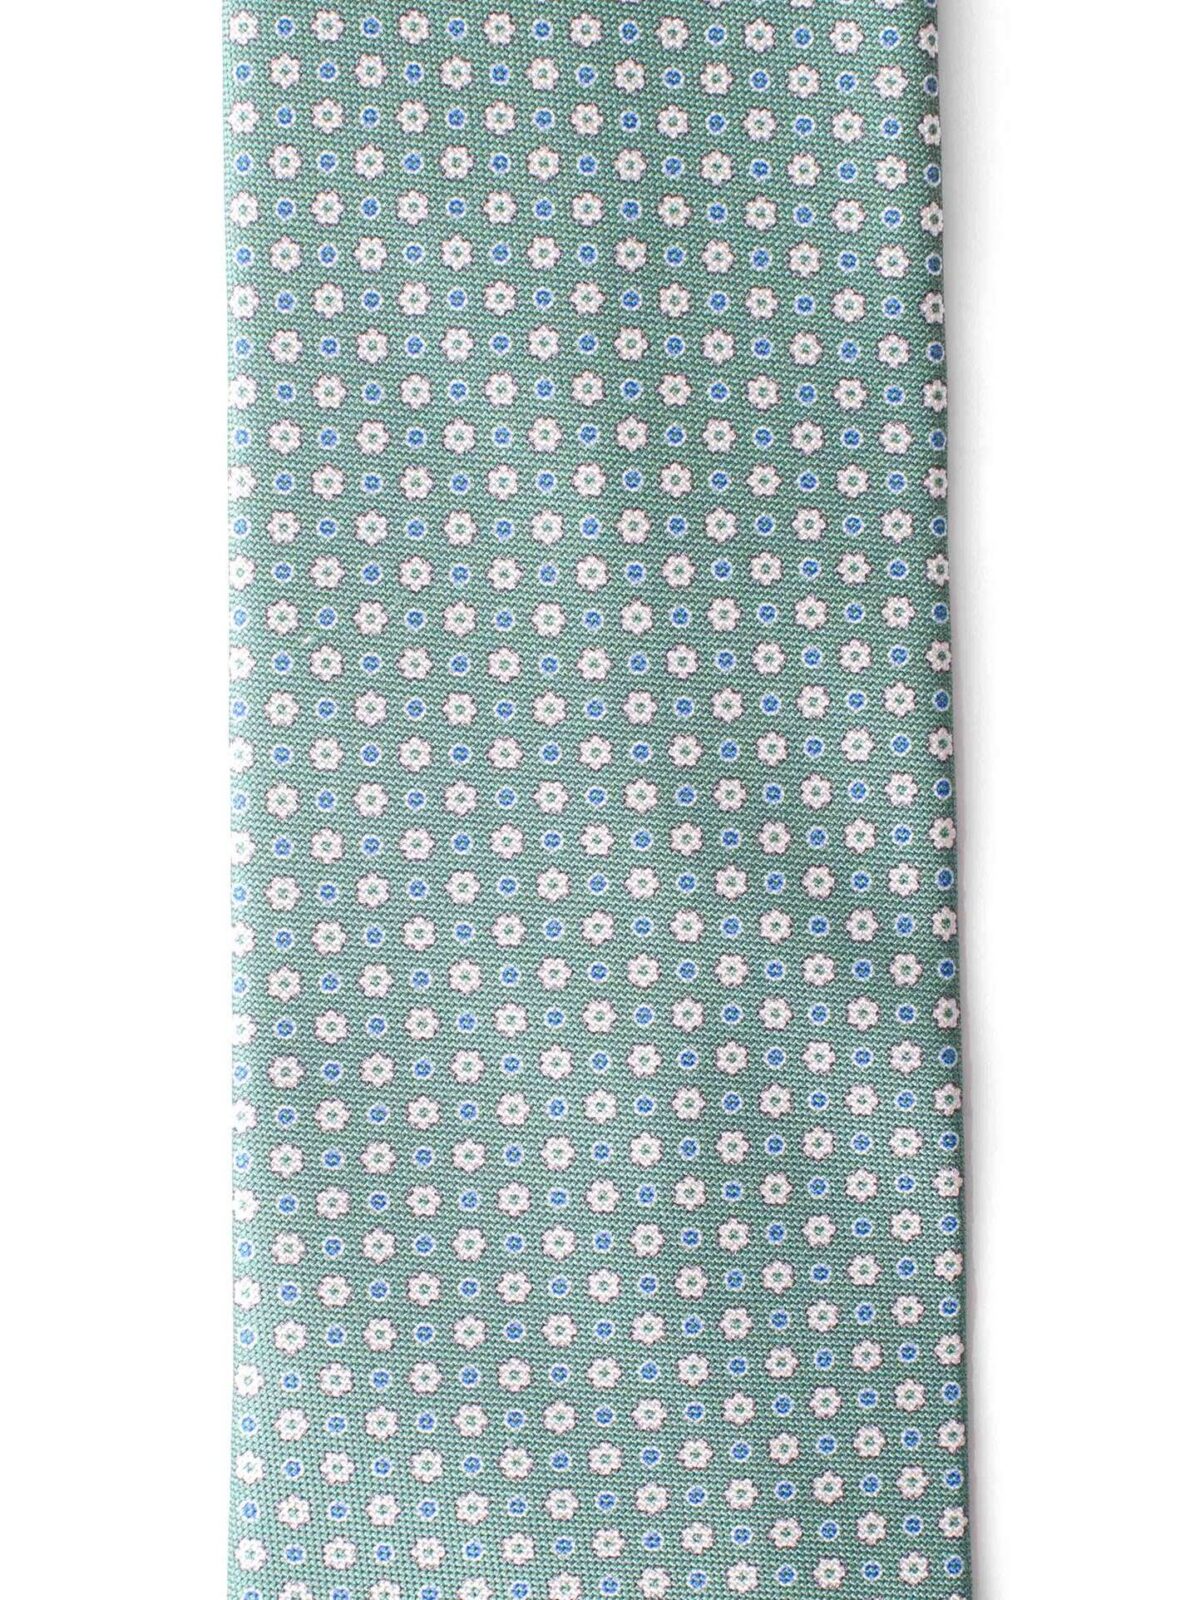 Light Green Small Floral Print Tie